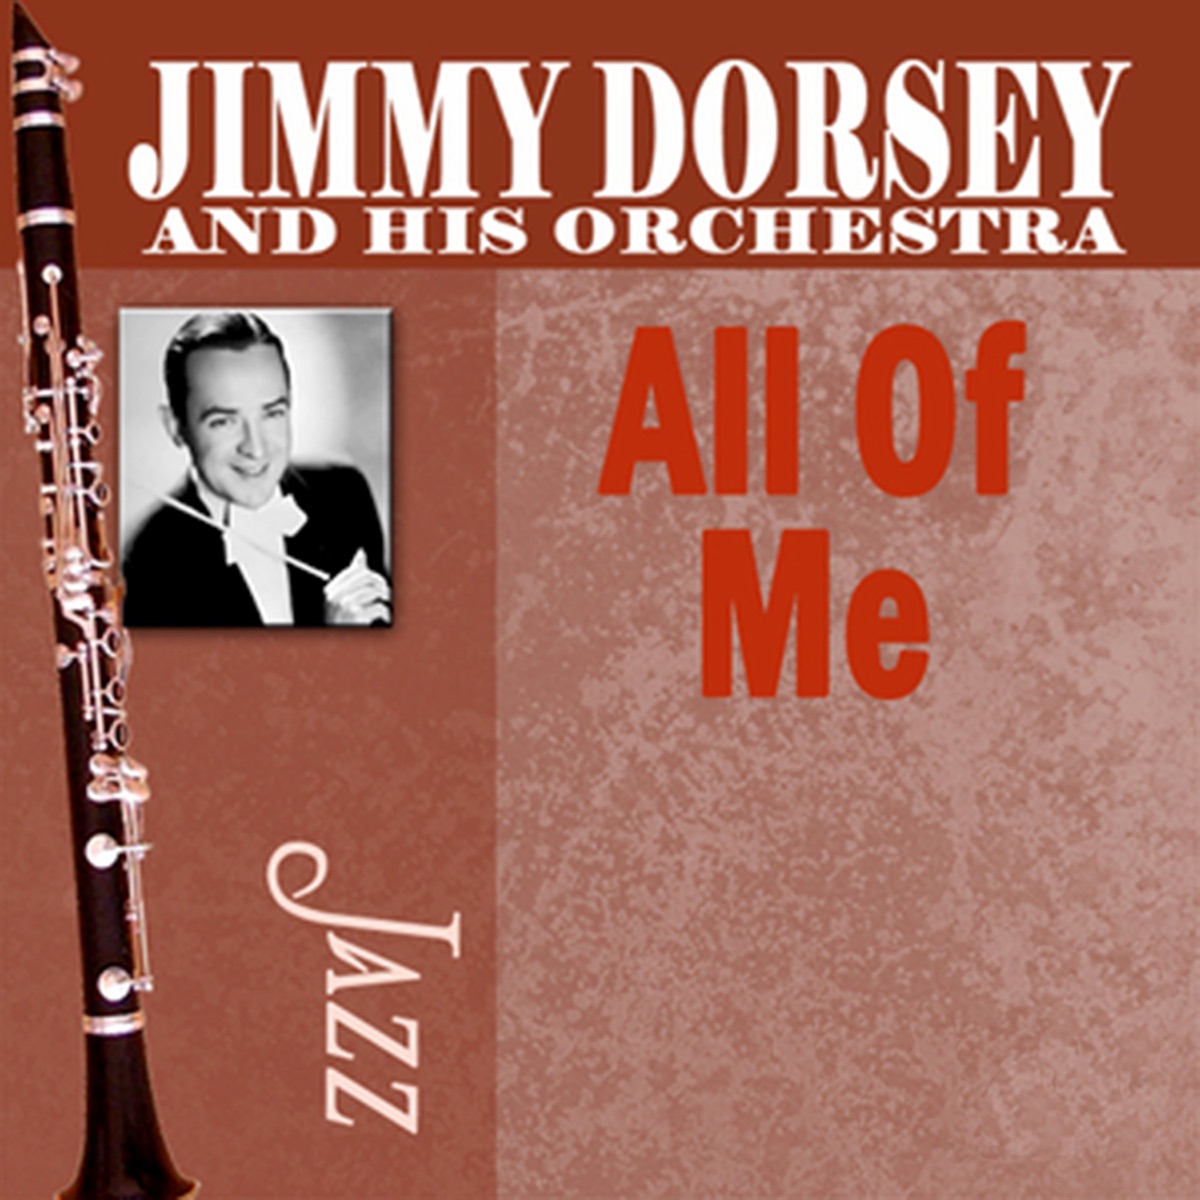 Latin American Favorites by Jimmy Dorsey and His Orchestra on Apple Music